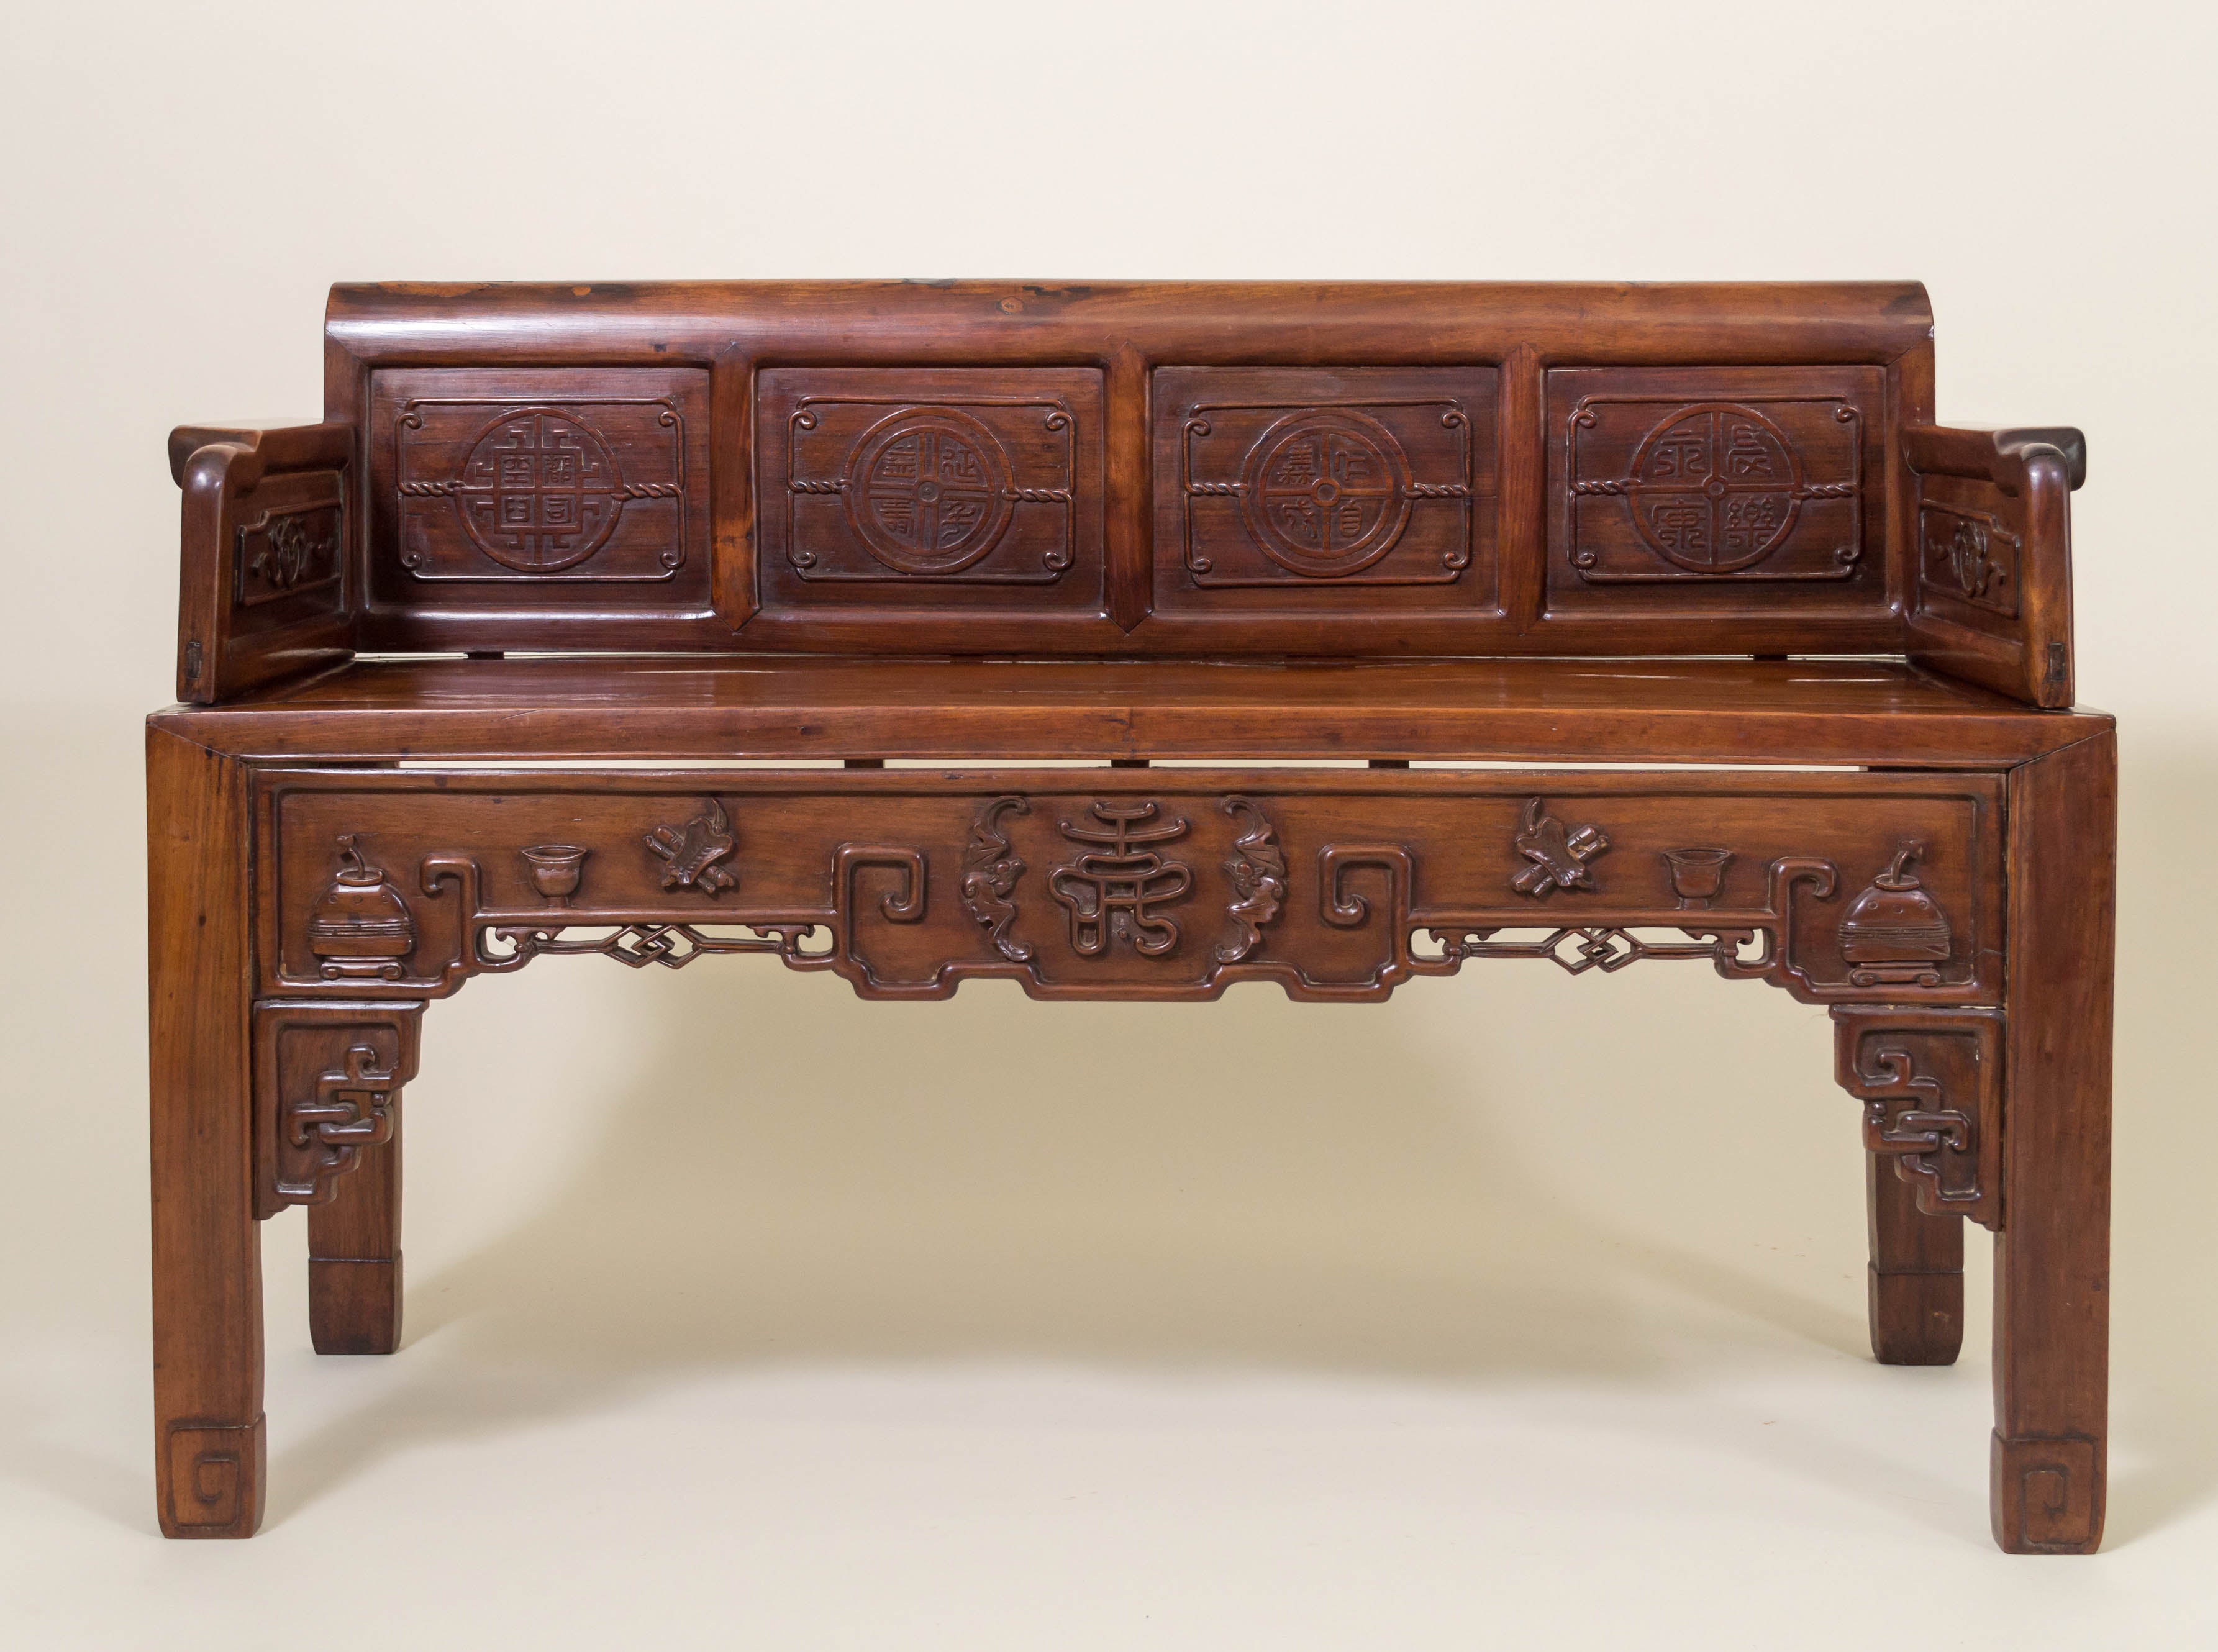 Chinese Rosewood Diminutive Bench. Late Qing dynasty, Circa 1890